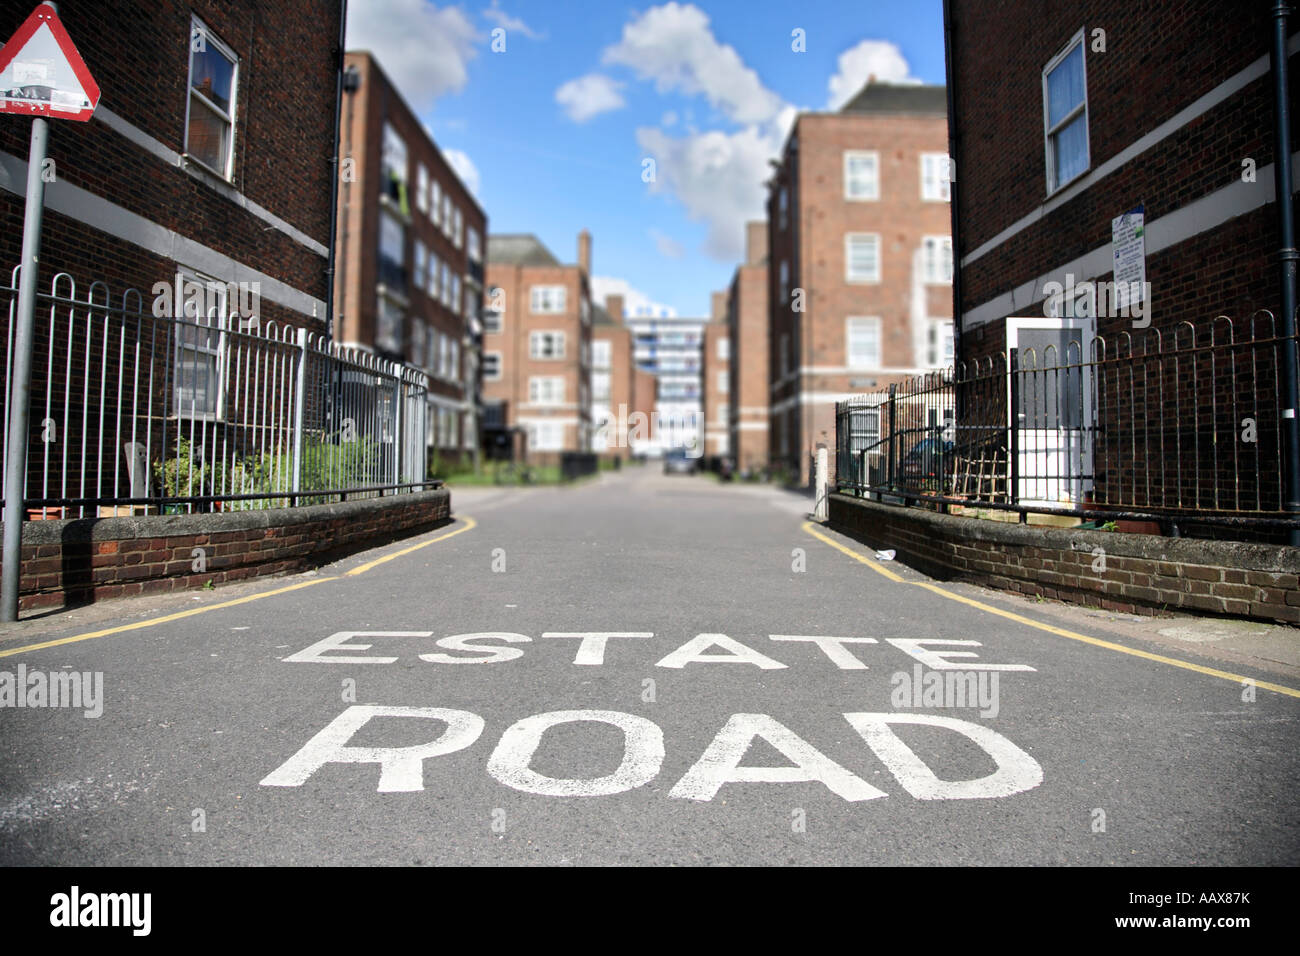 an entrance to a council housing estate in Bethnal Green, East London Stock Photo